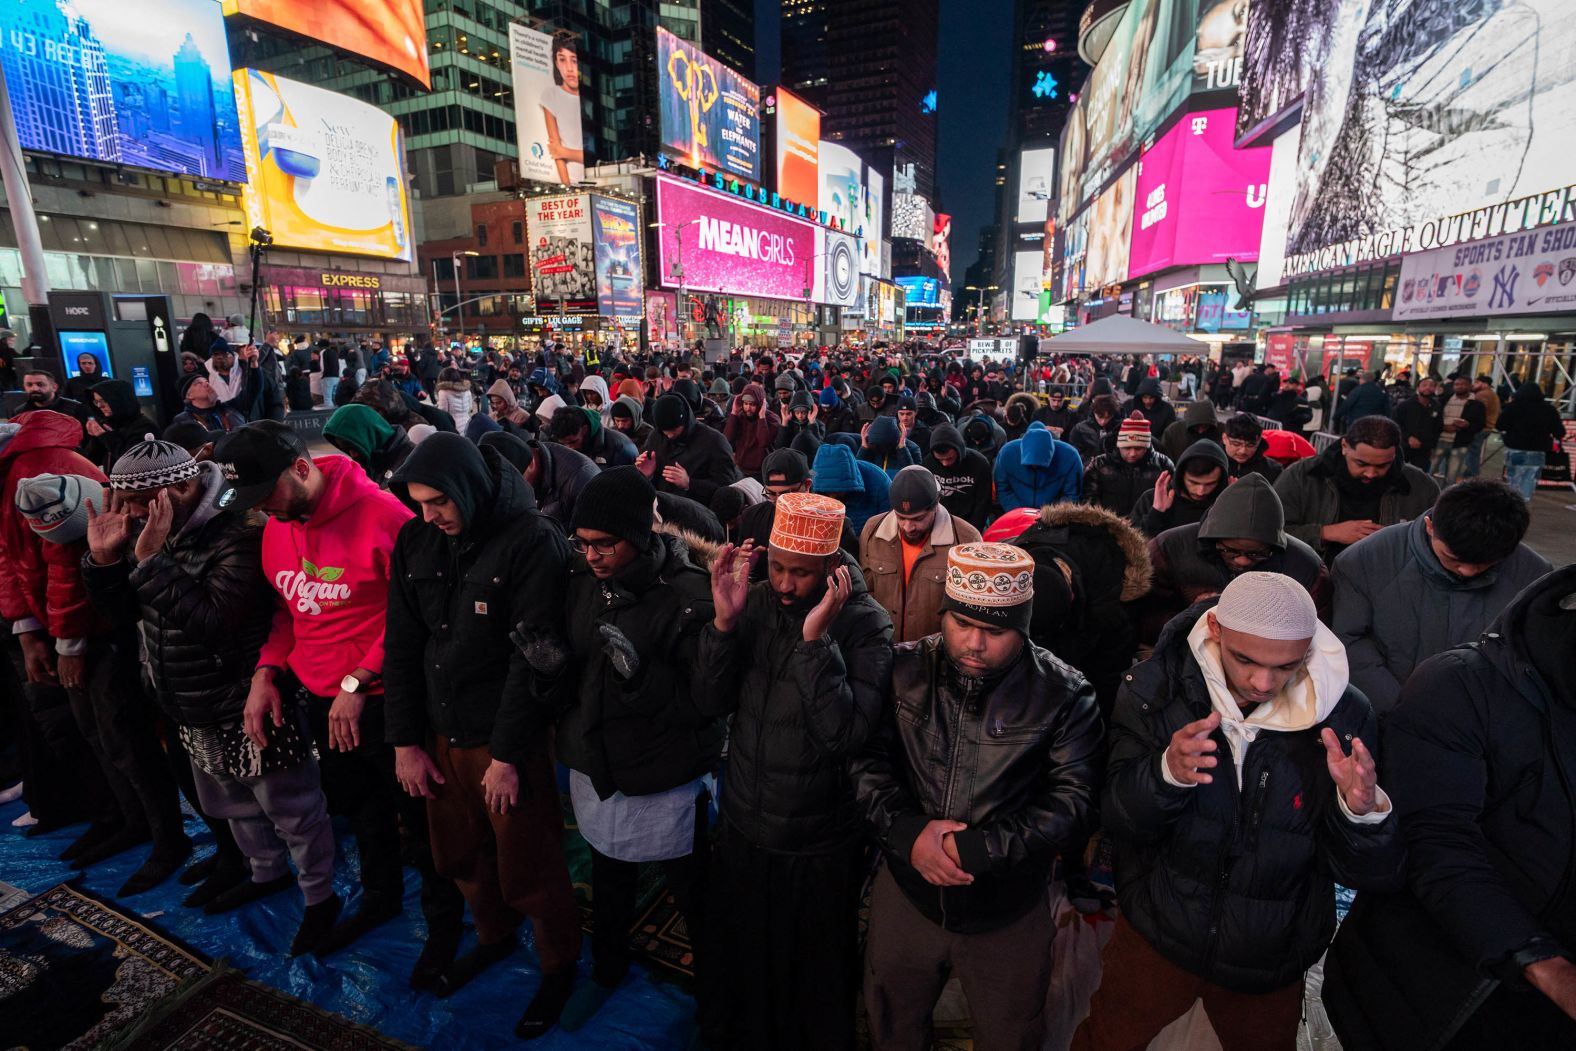 Members of the Muslim community gather for the first Taraweeh prayer of Ramadan in Times Square, New York City, on March 10.